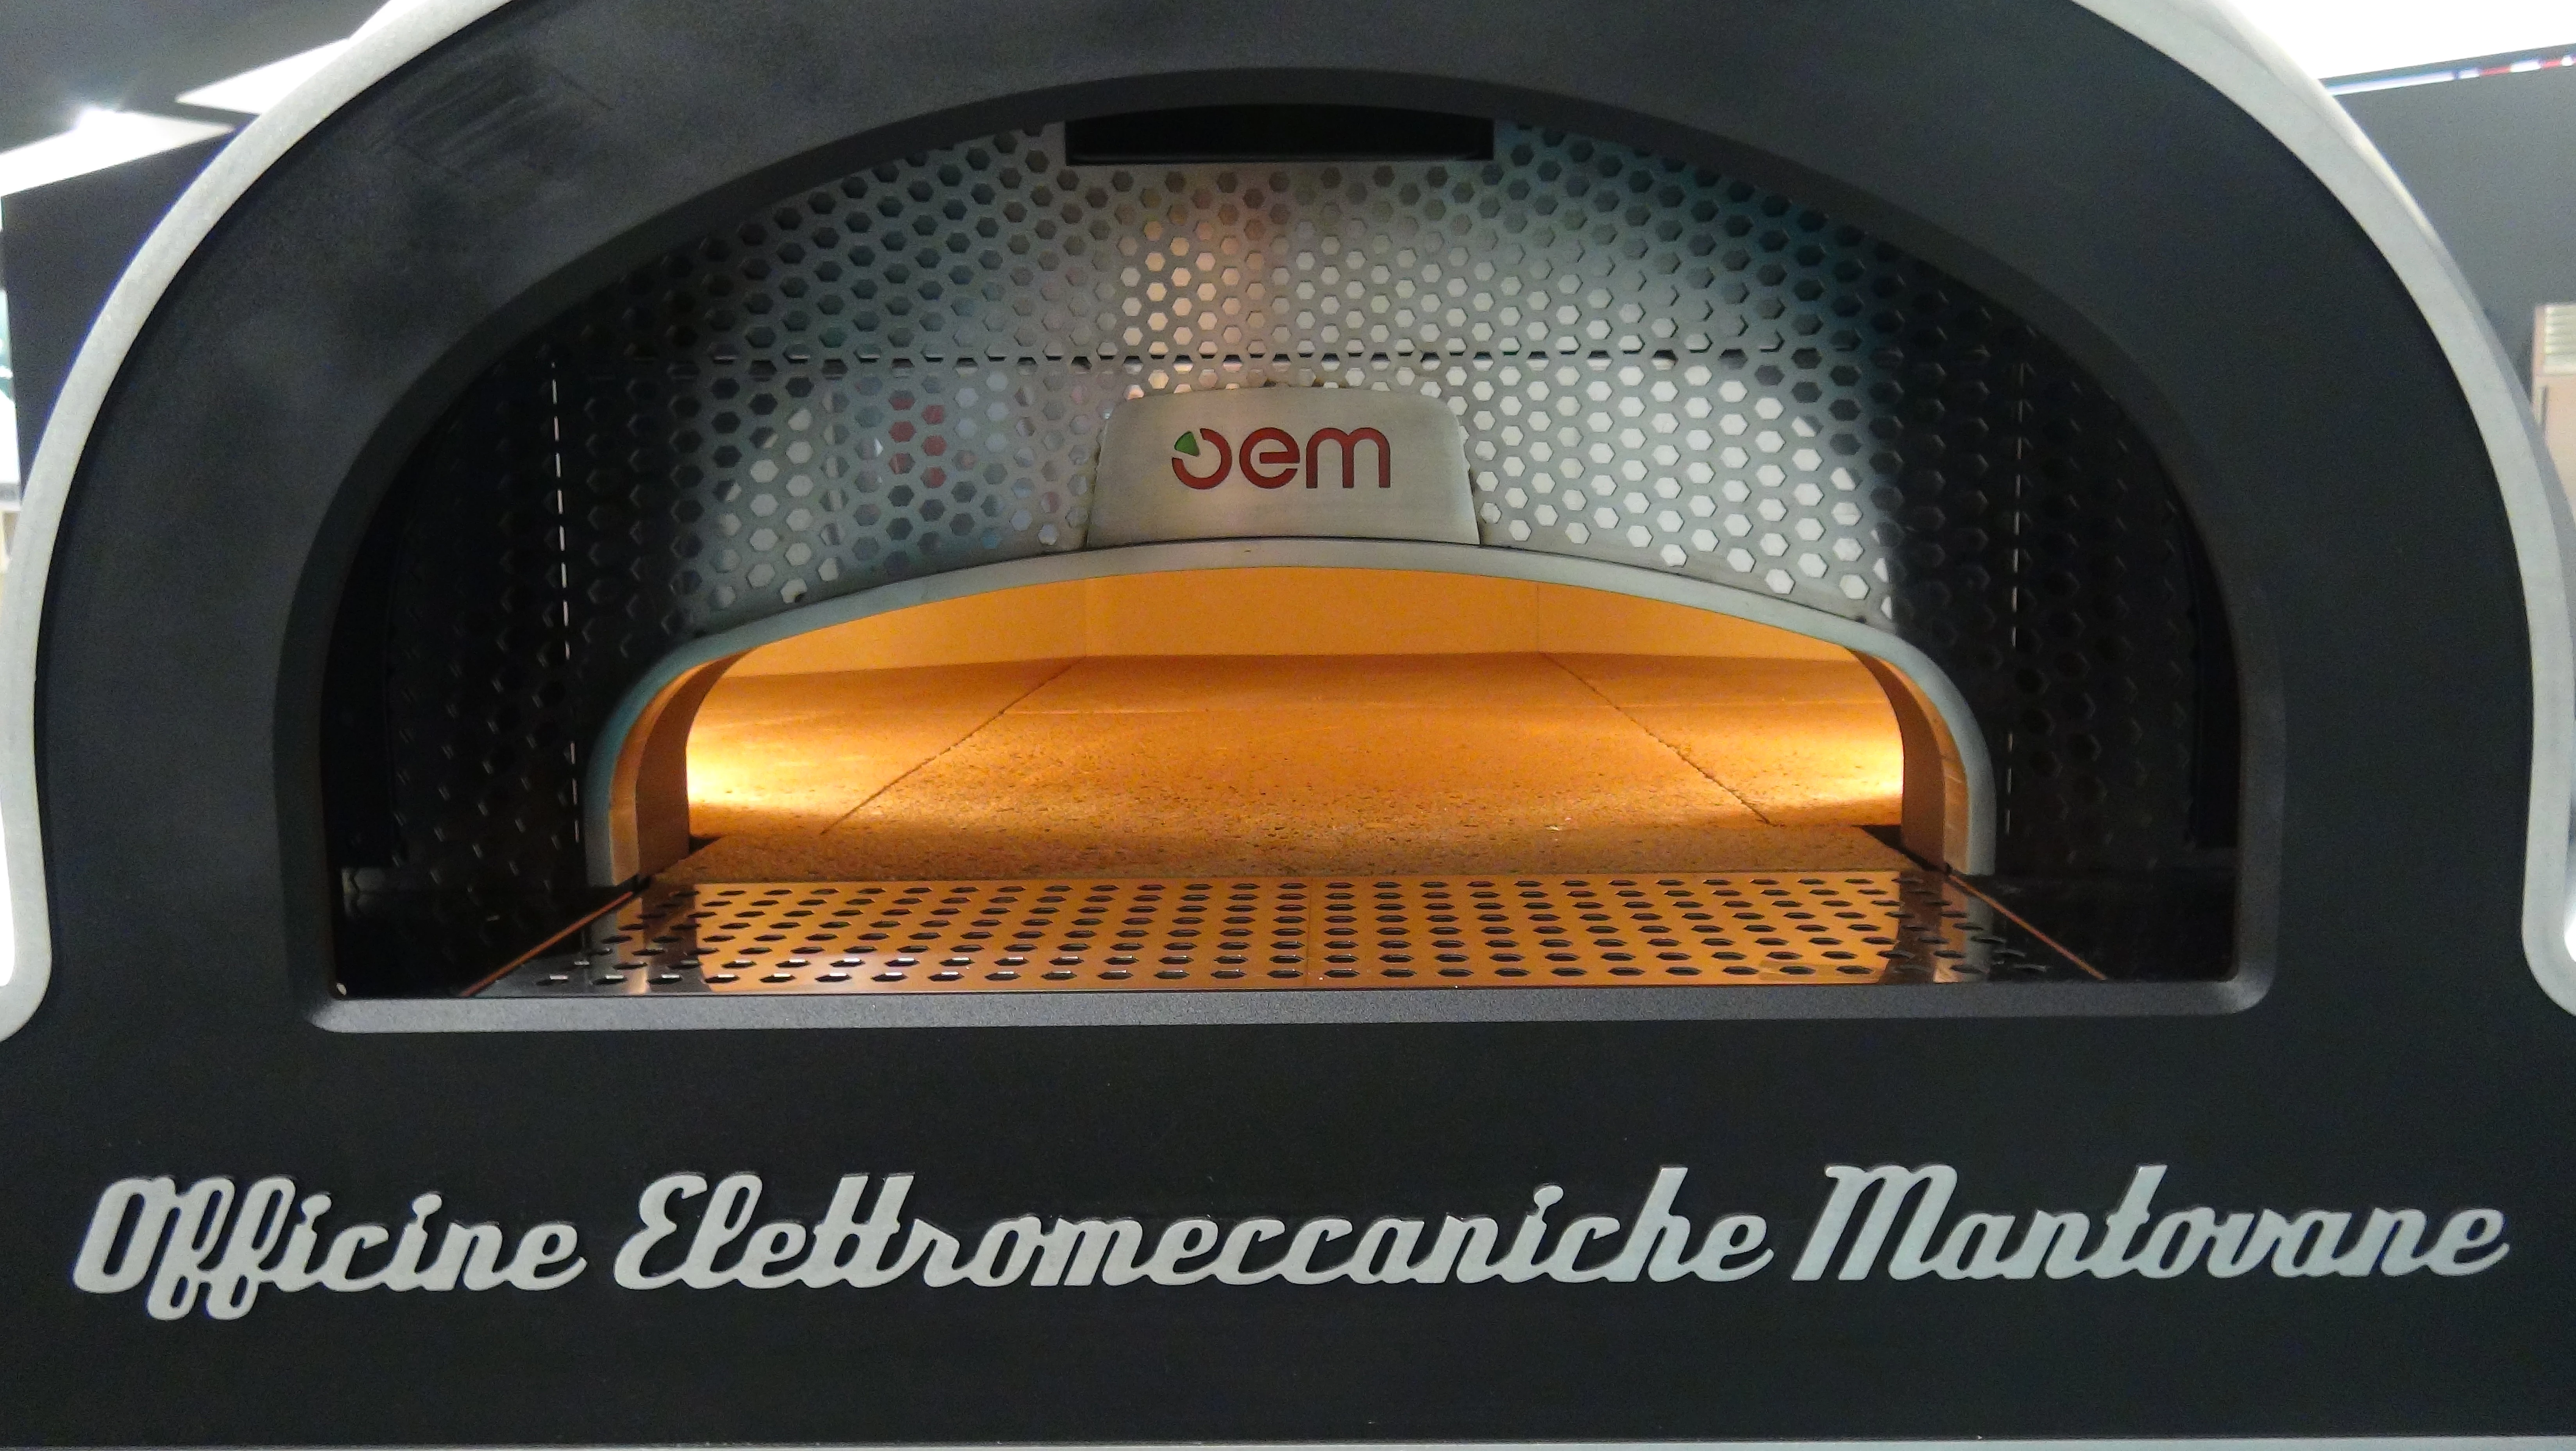 OEM Dome pizzaovn